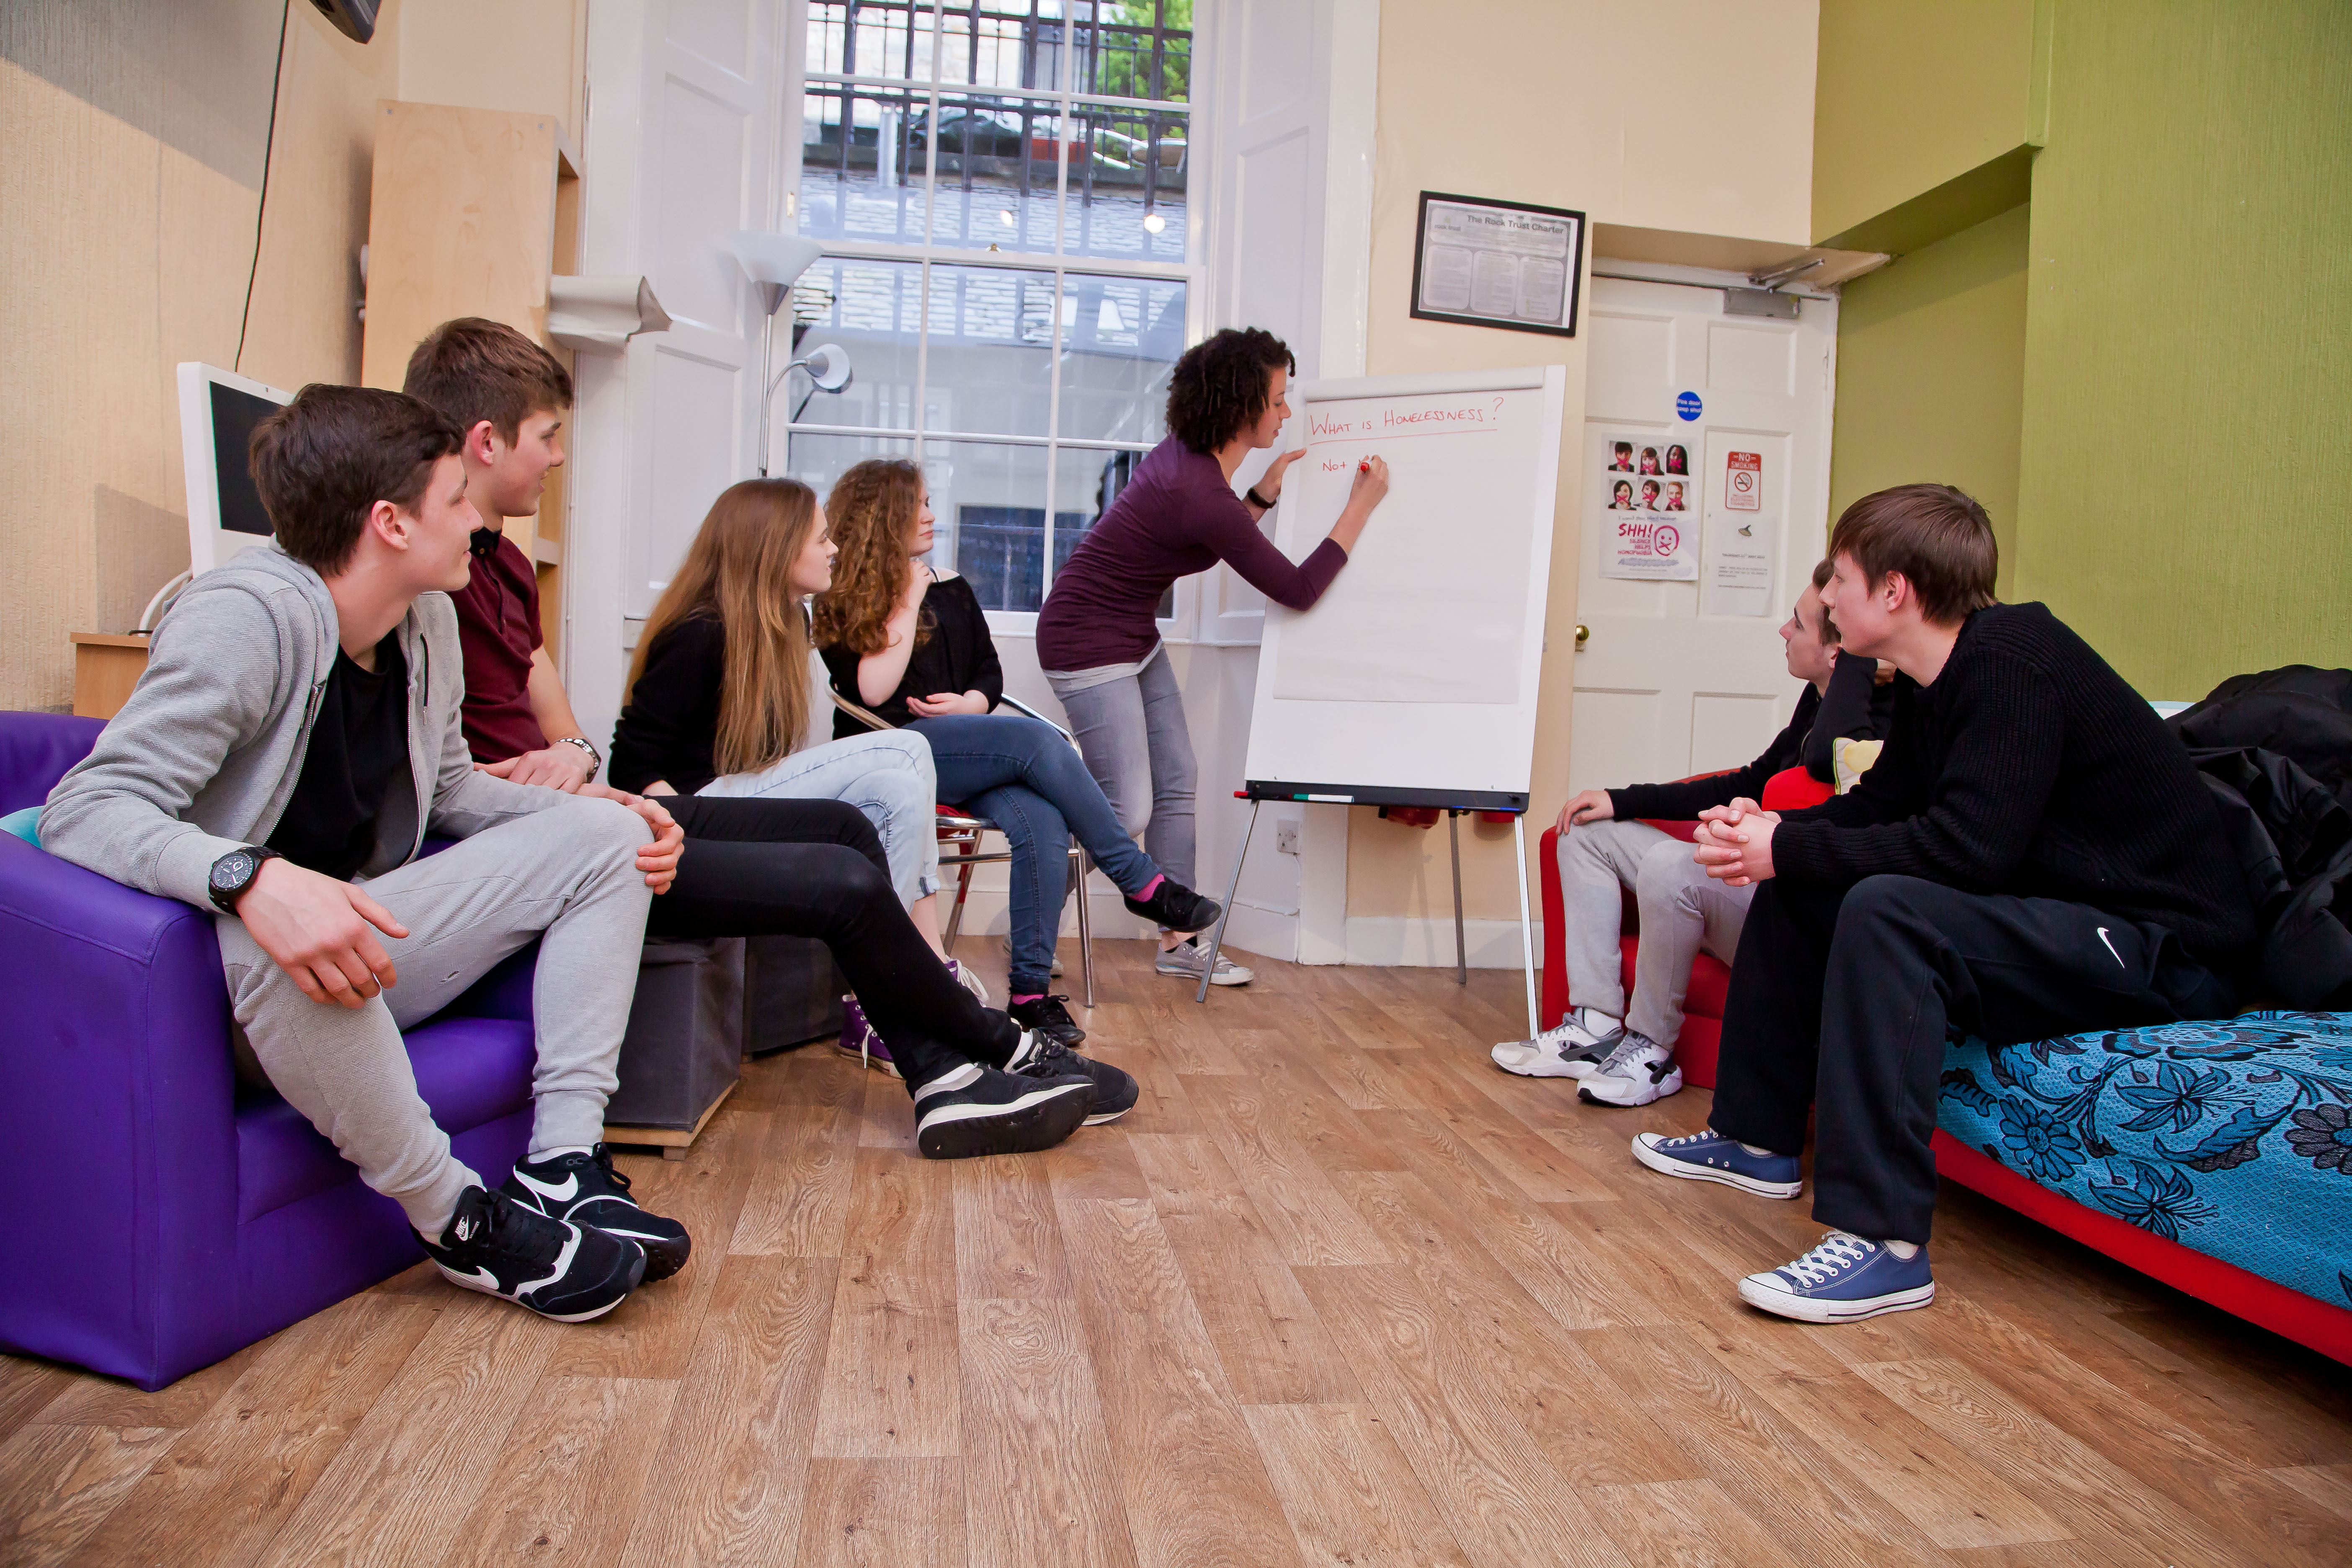 New partnership launched to prevent youth homelessness in Edinburgh